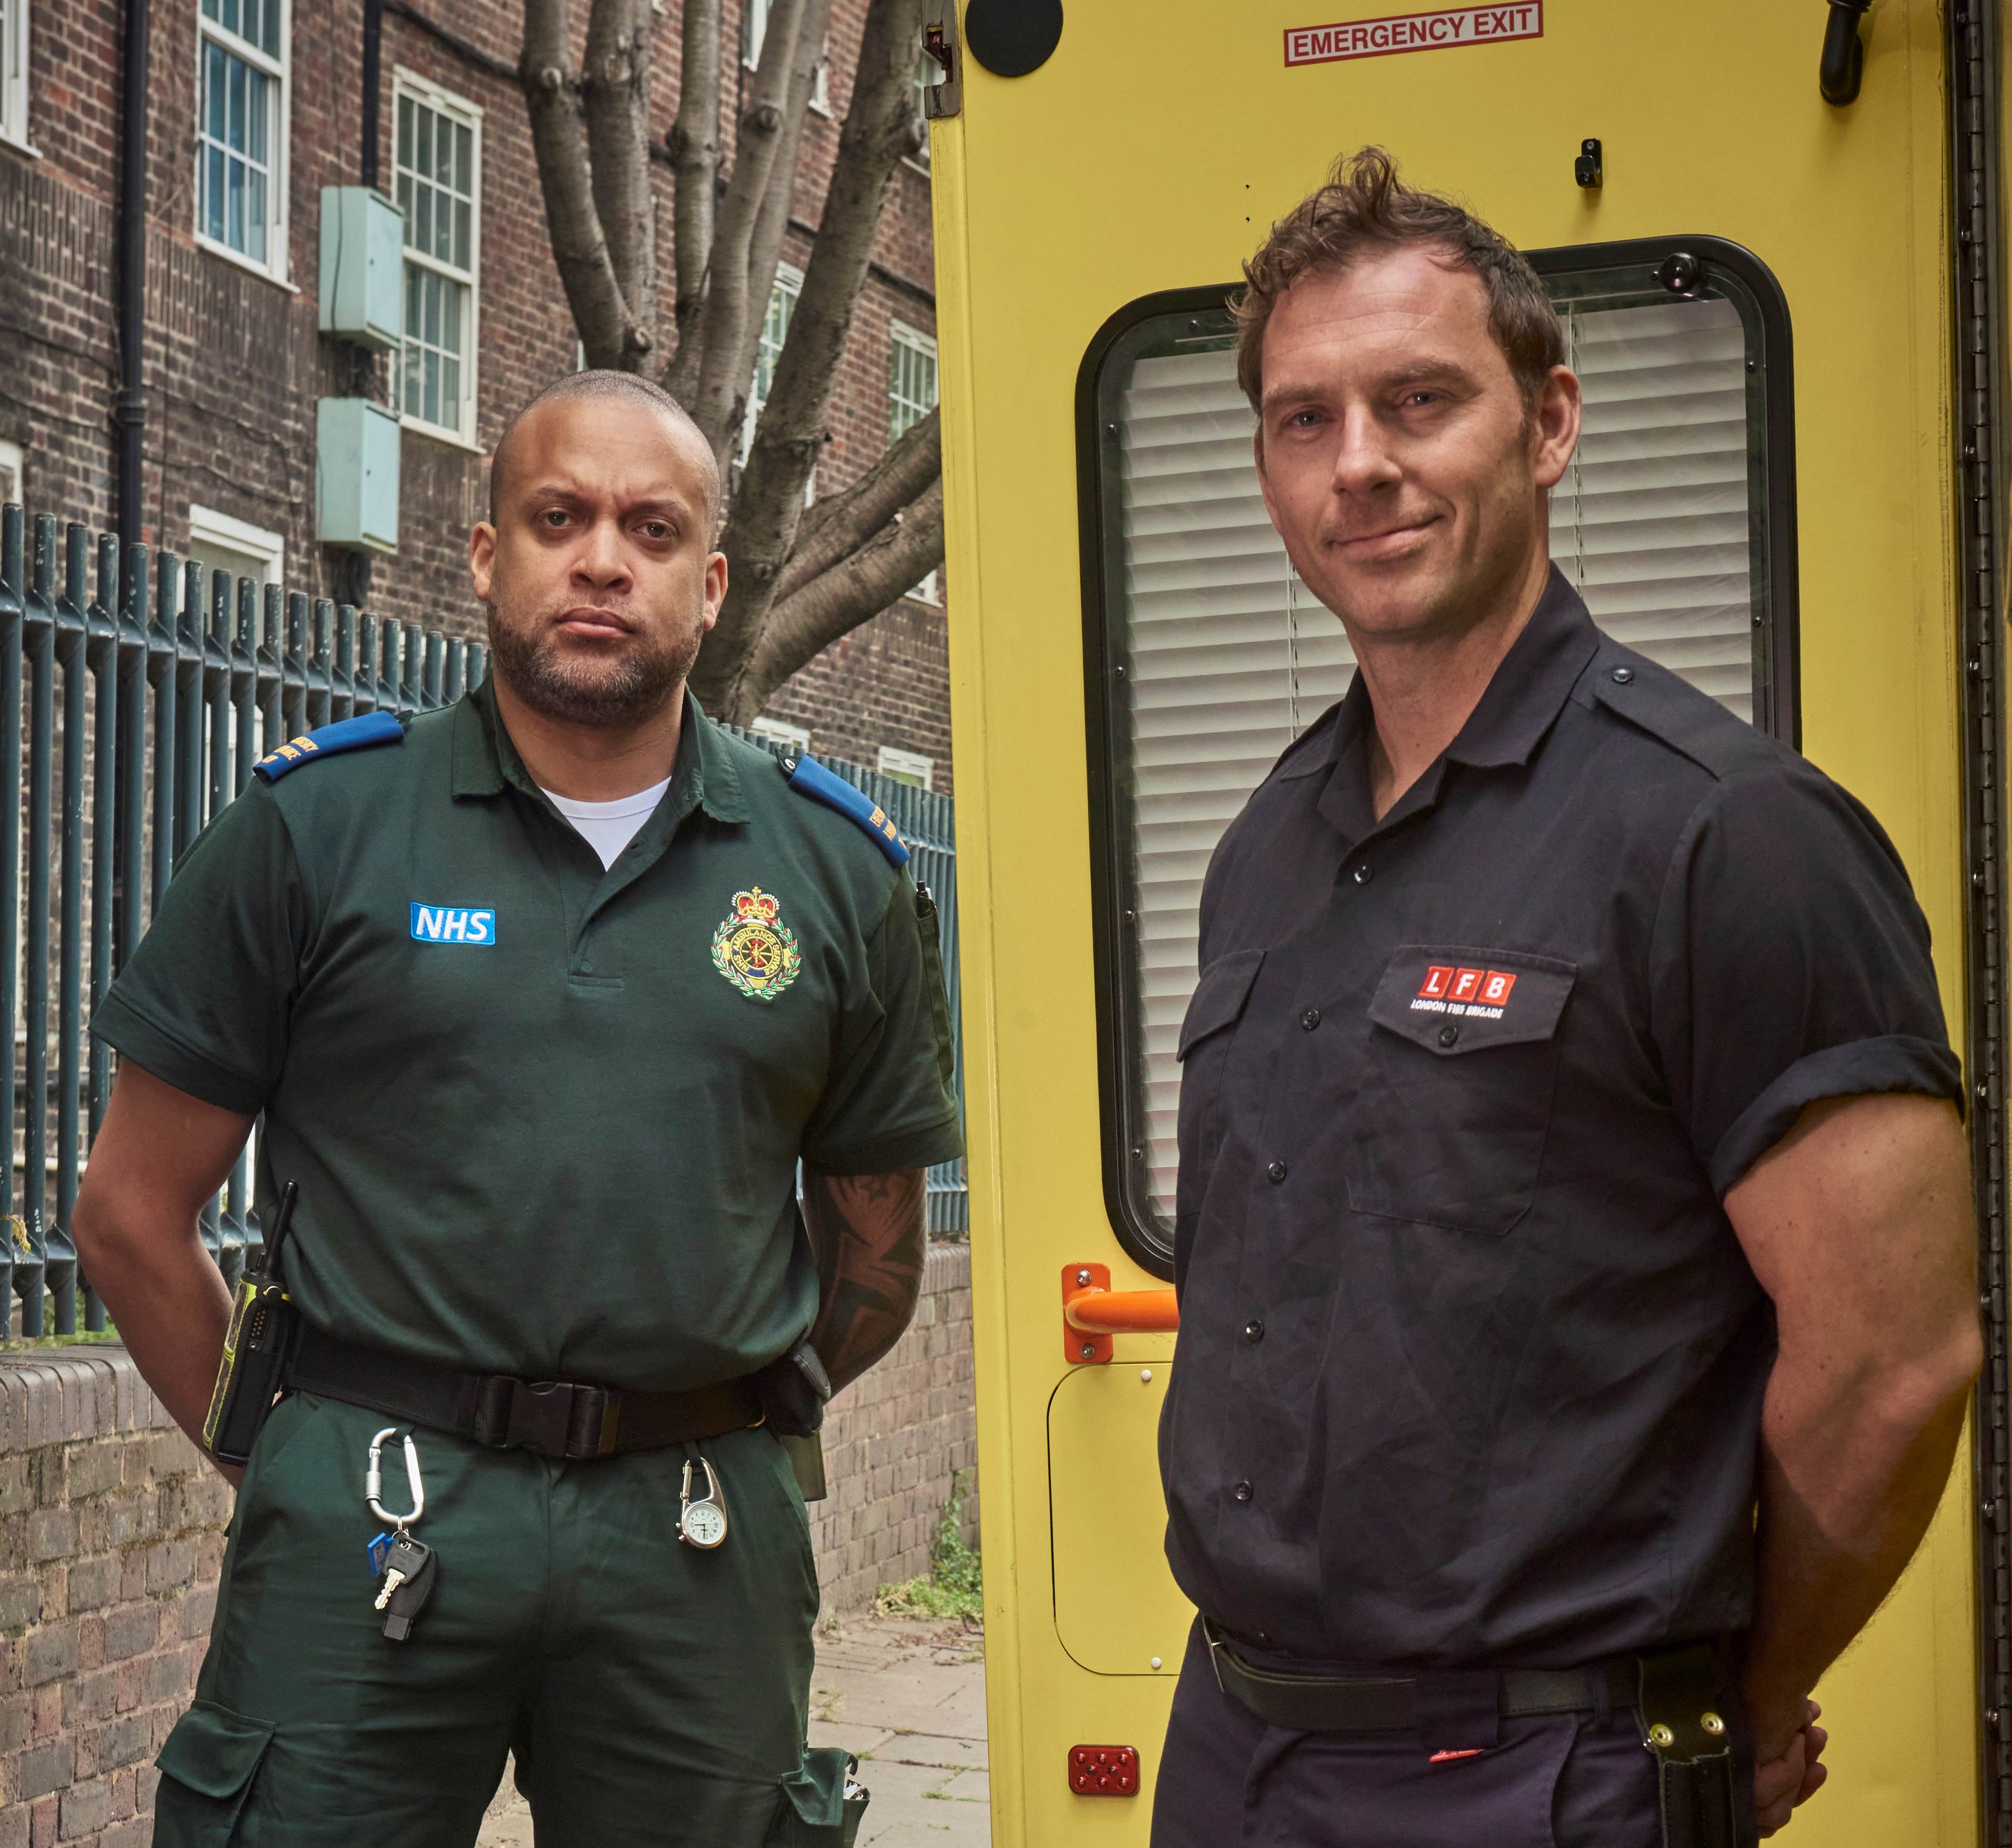 NHS ambulance paramedic and London Fire Brigade officer standing together on pavement.